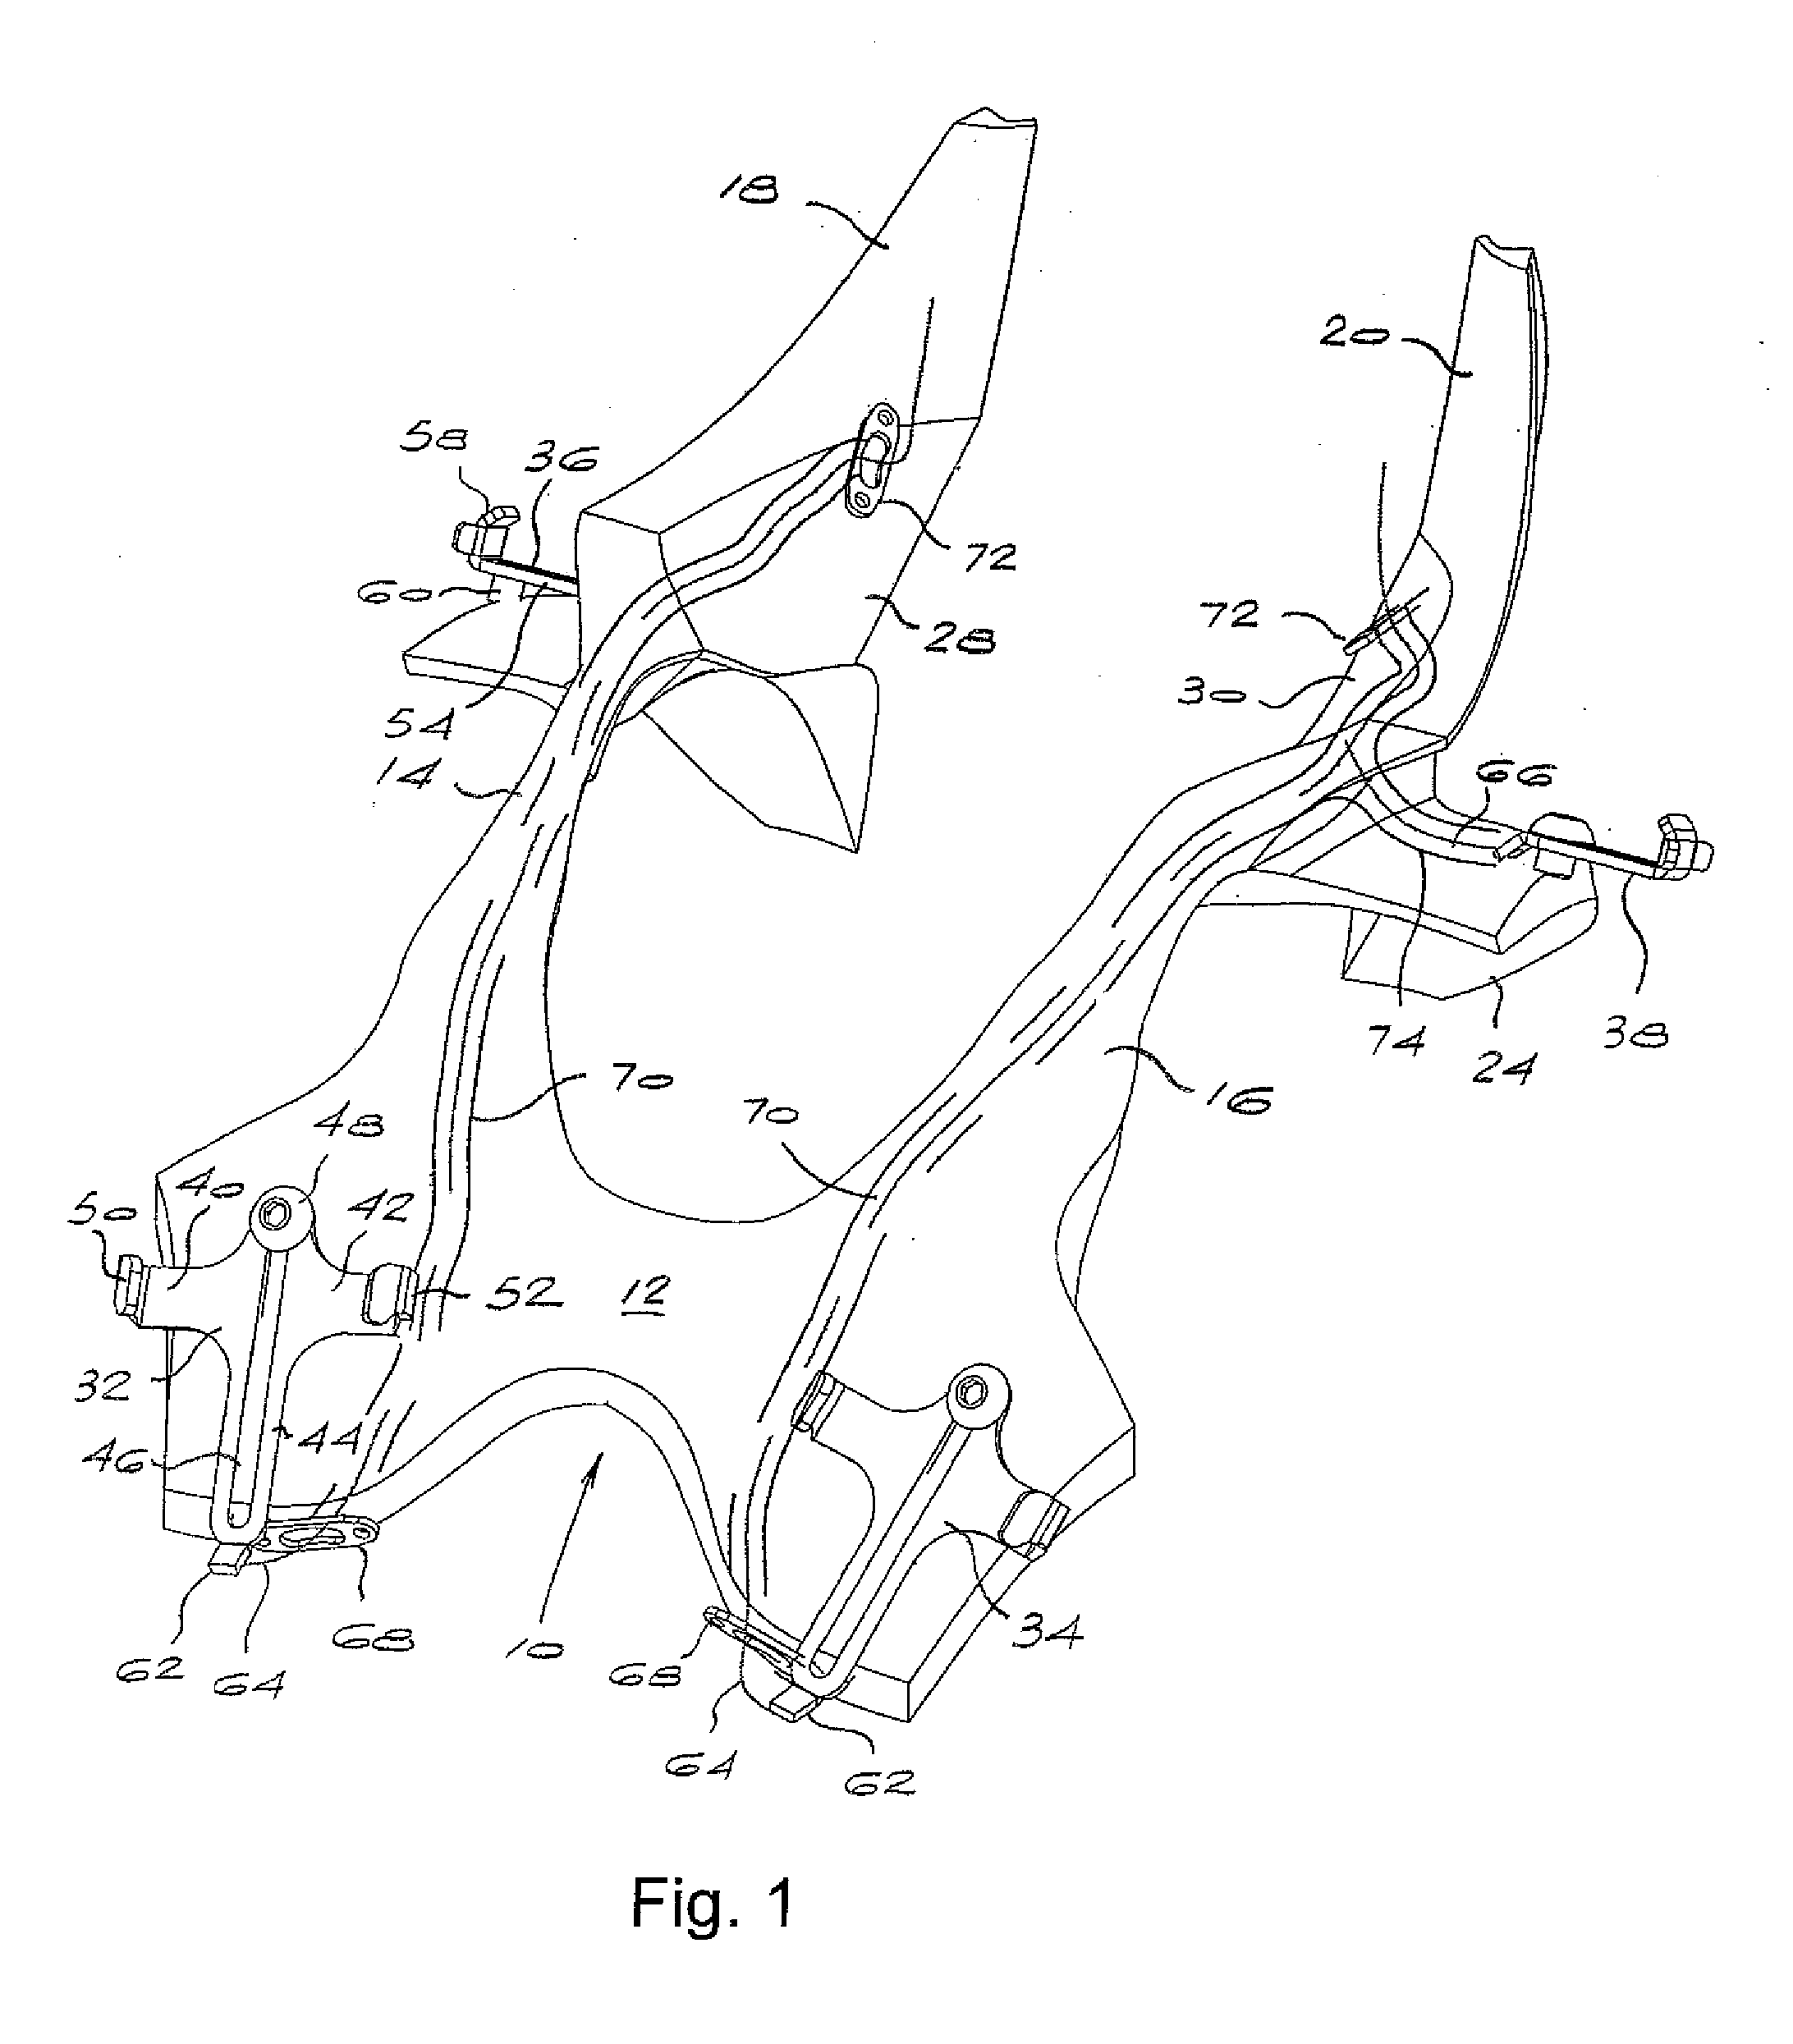 Adaptive head and neck restraint system for a vehicle occupant